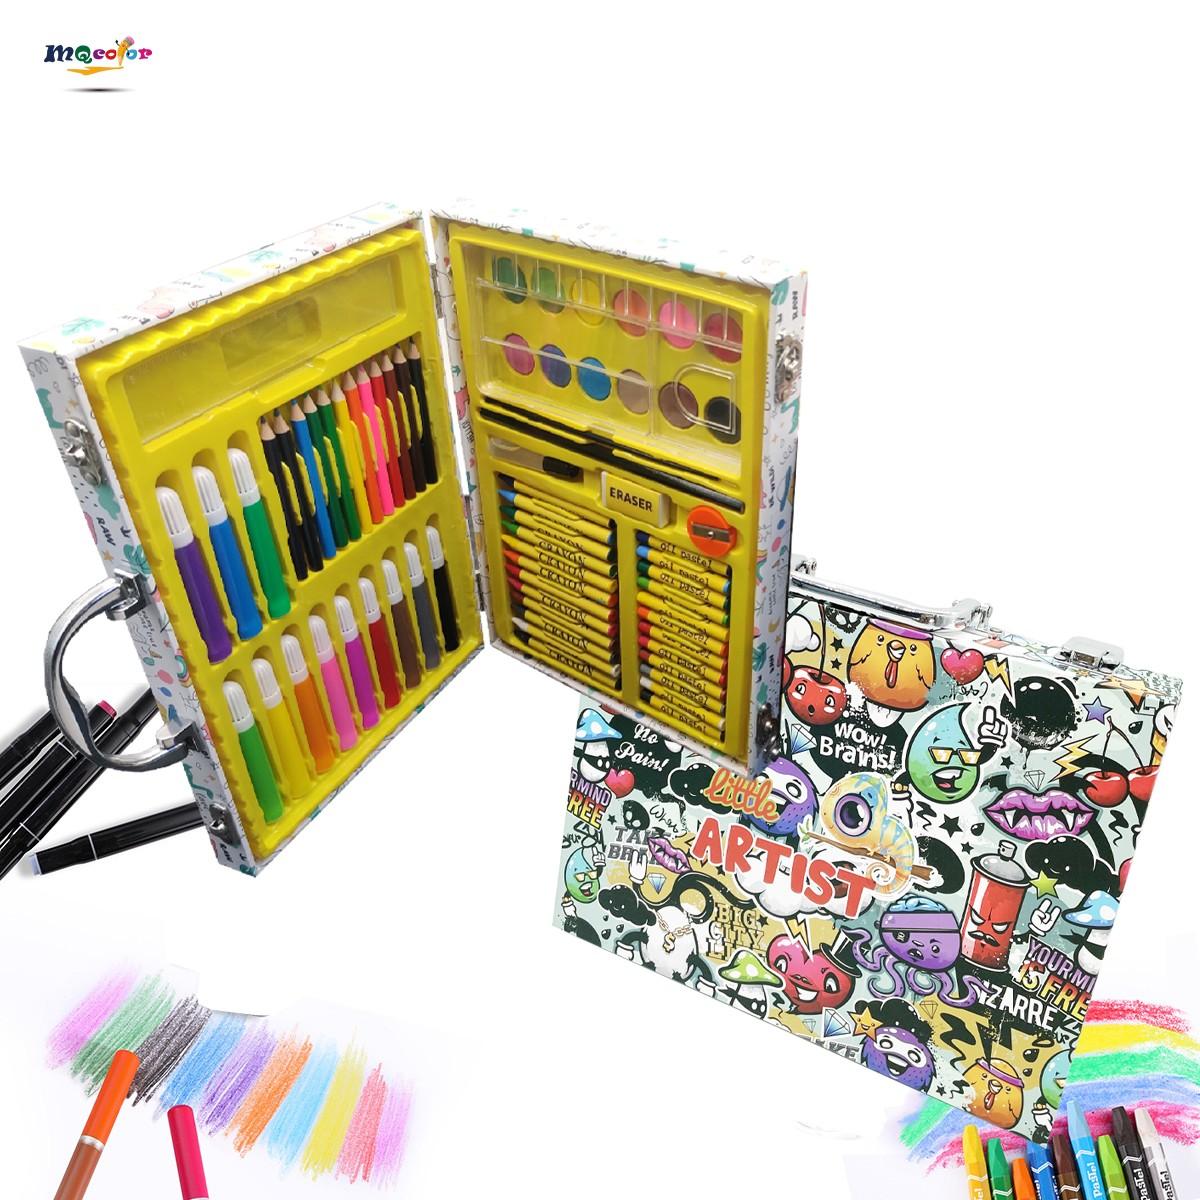 2022 New gifts nice pack 53 Pcs Non-Toxic Kids Wooden Box Watercolor Pen Colour Pencil Art Drawing Set Painting Set